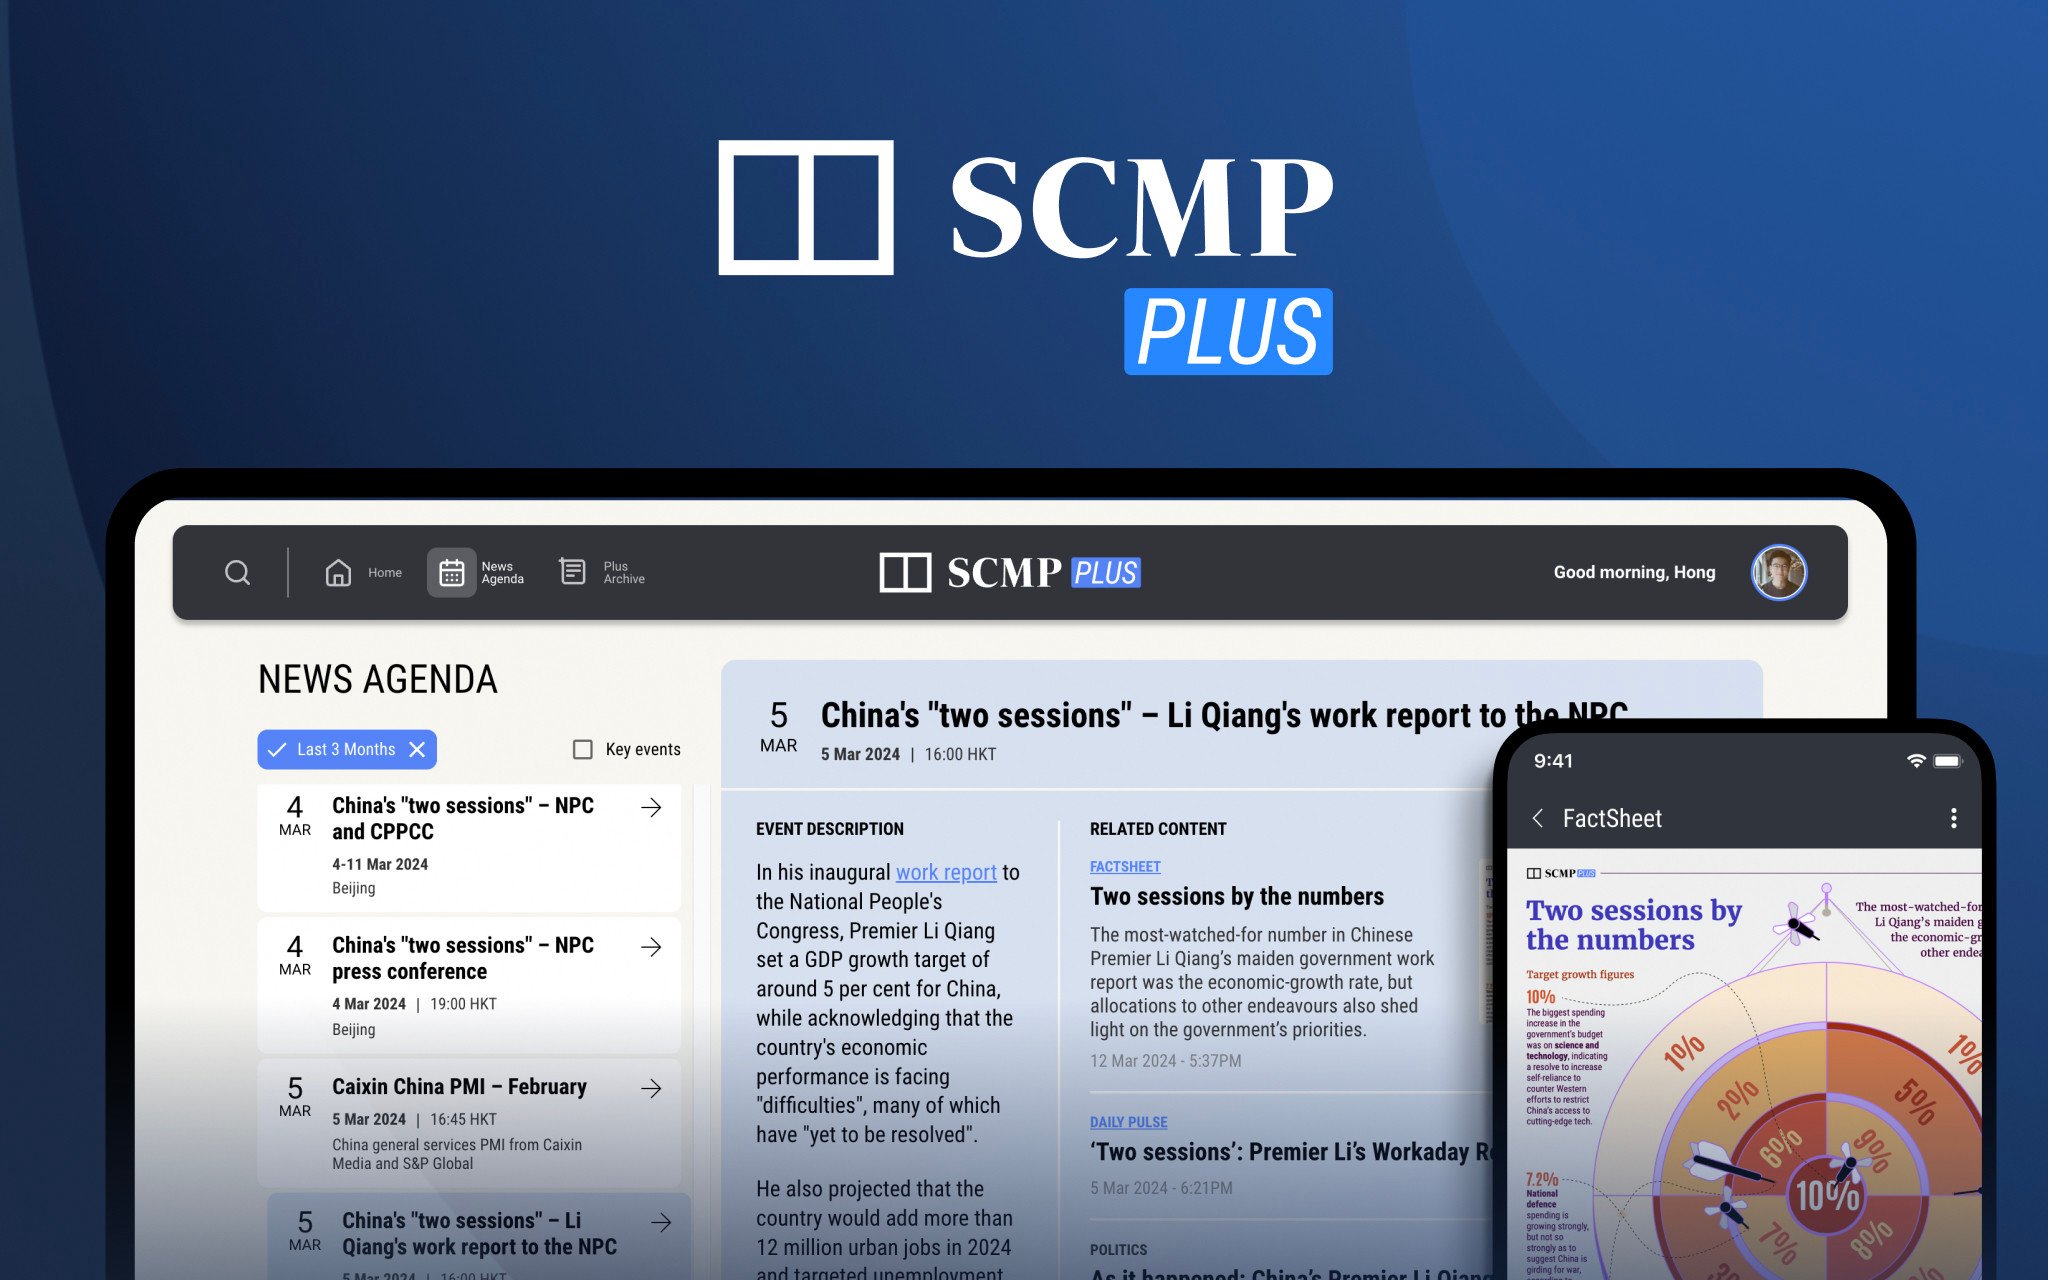 SCMP Plus serves as a complement to existing Post content.